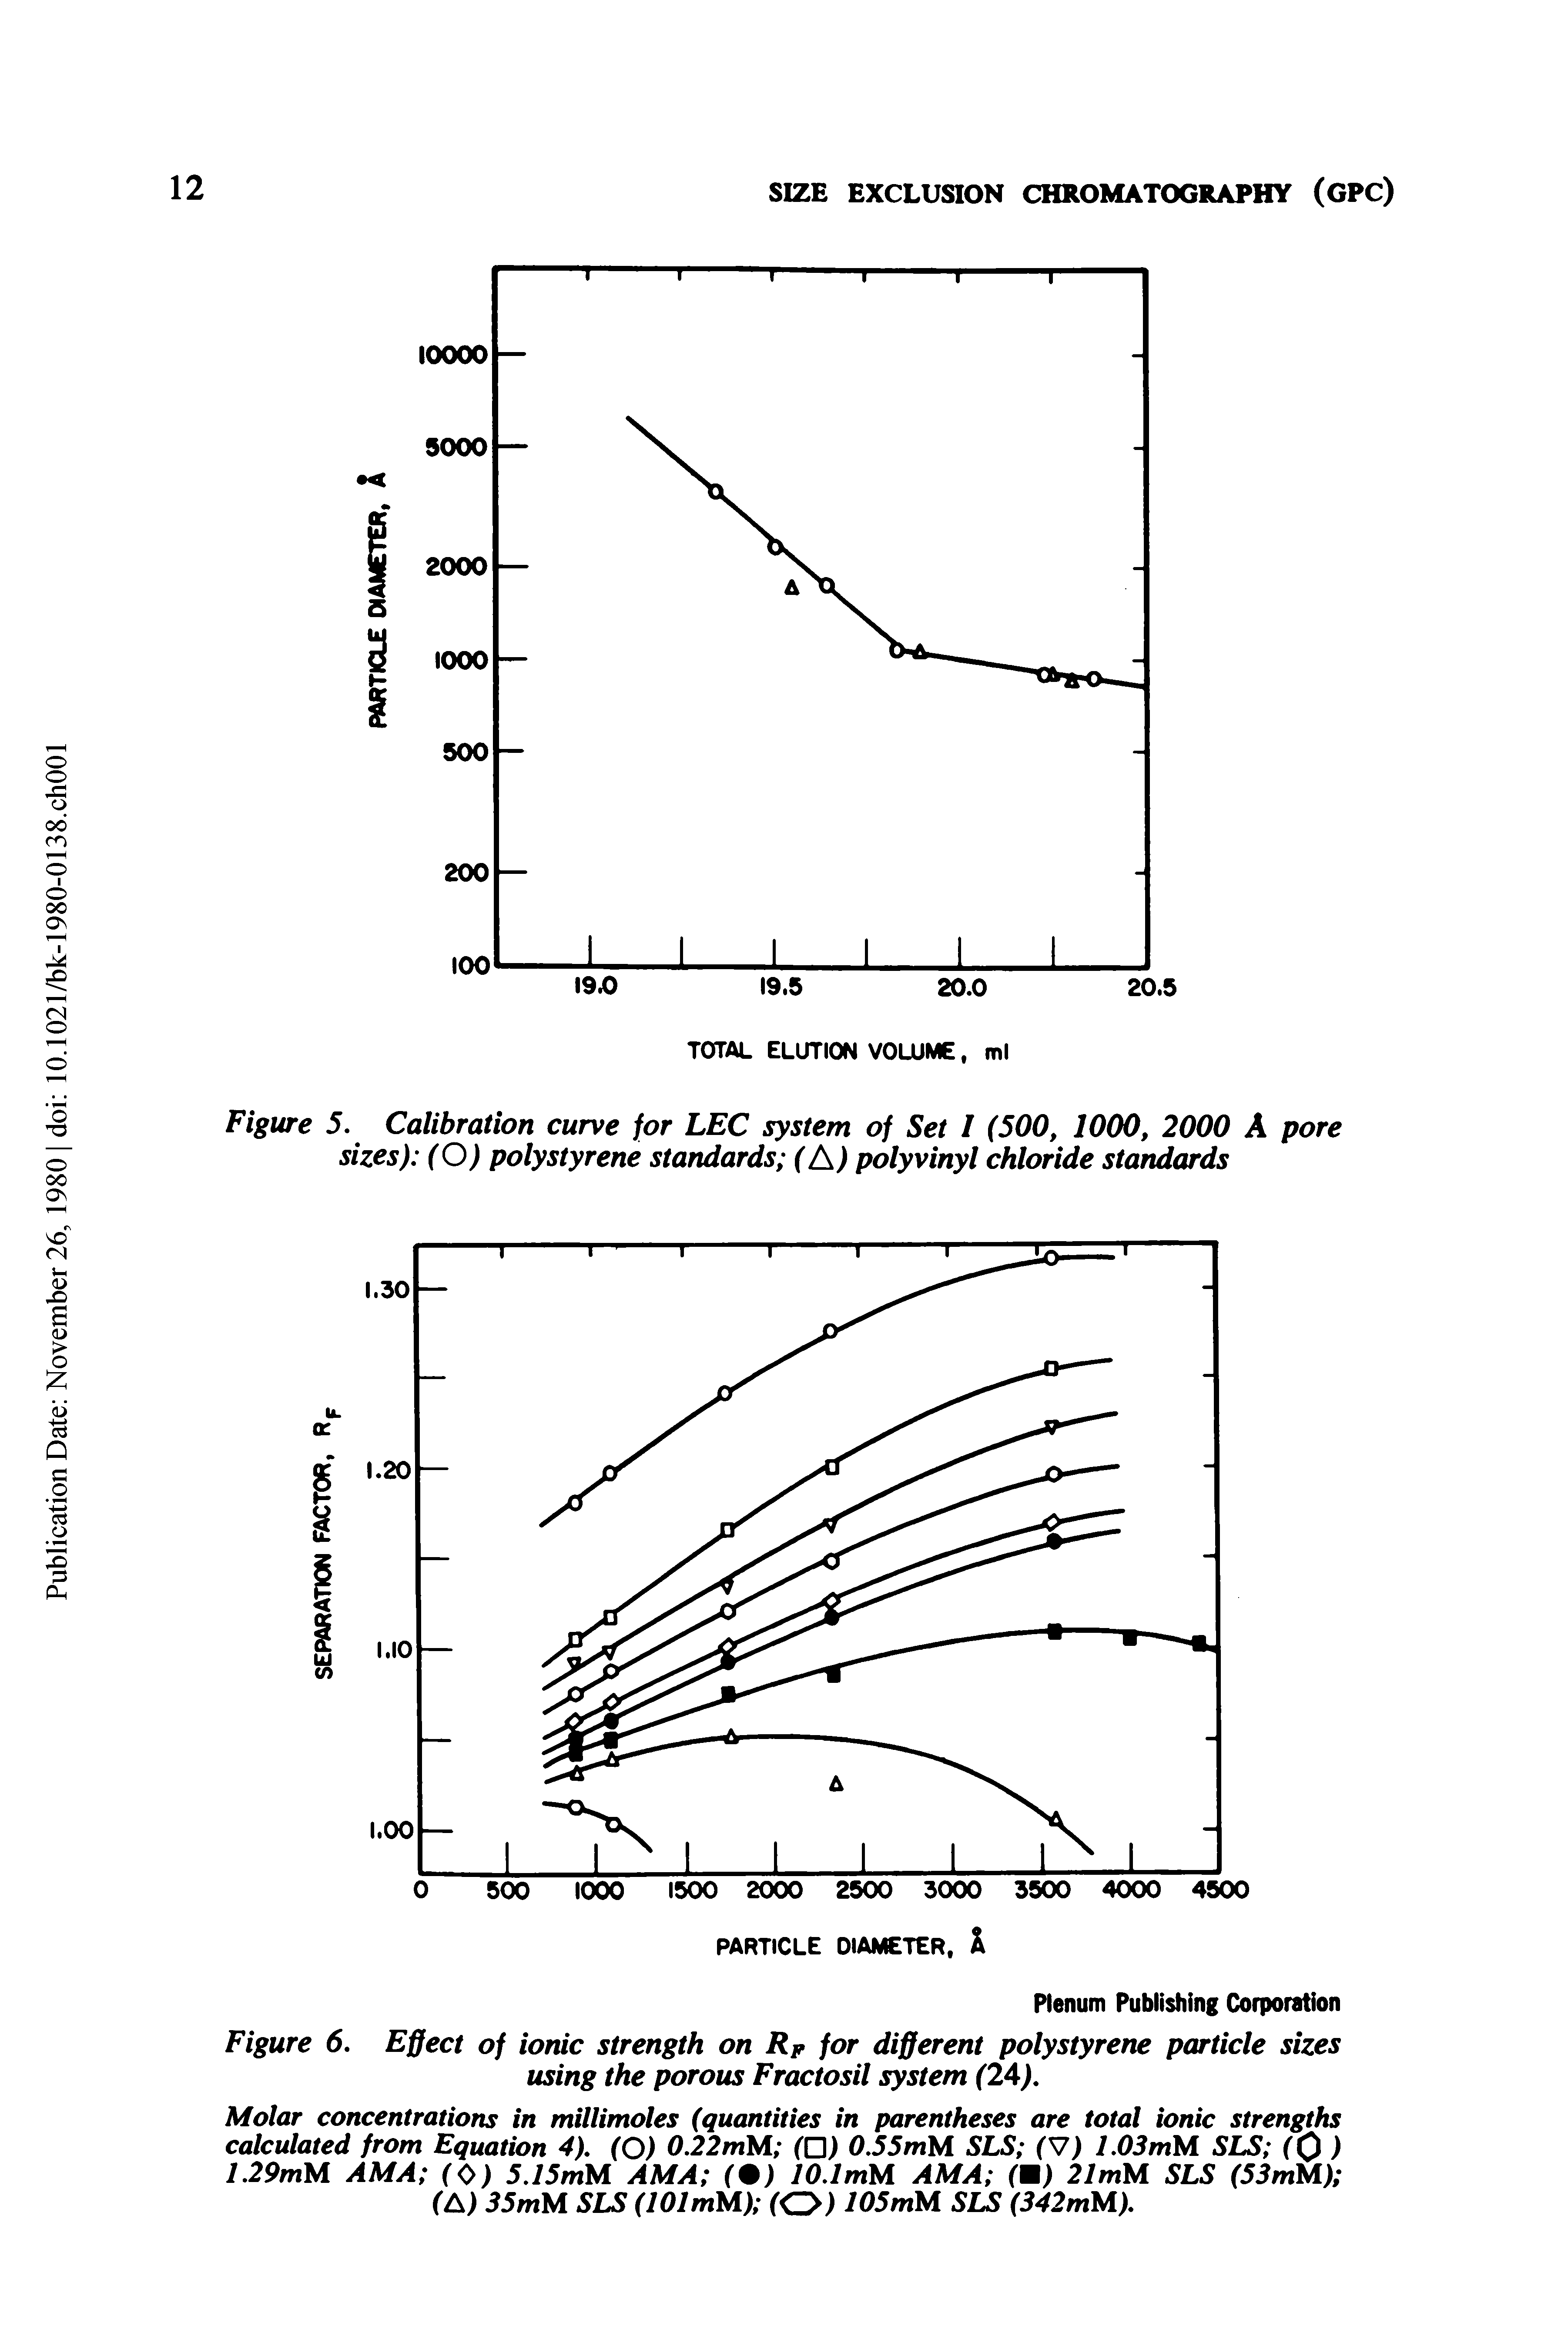 Figure 6. Effect of ionic strength on Rp for different polystyrene particle sizes using the porous Fractosil system (2A).